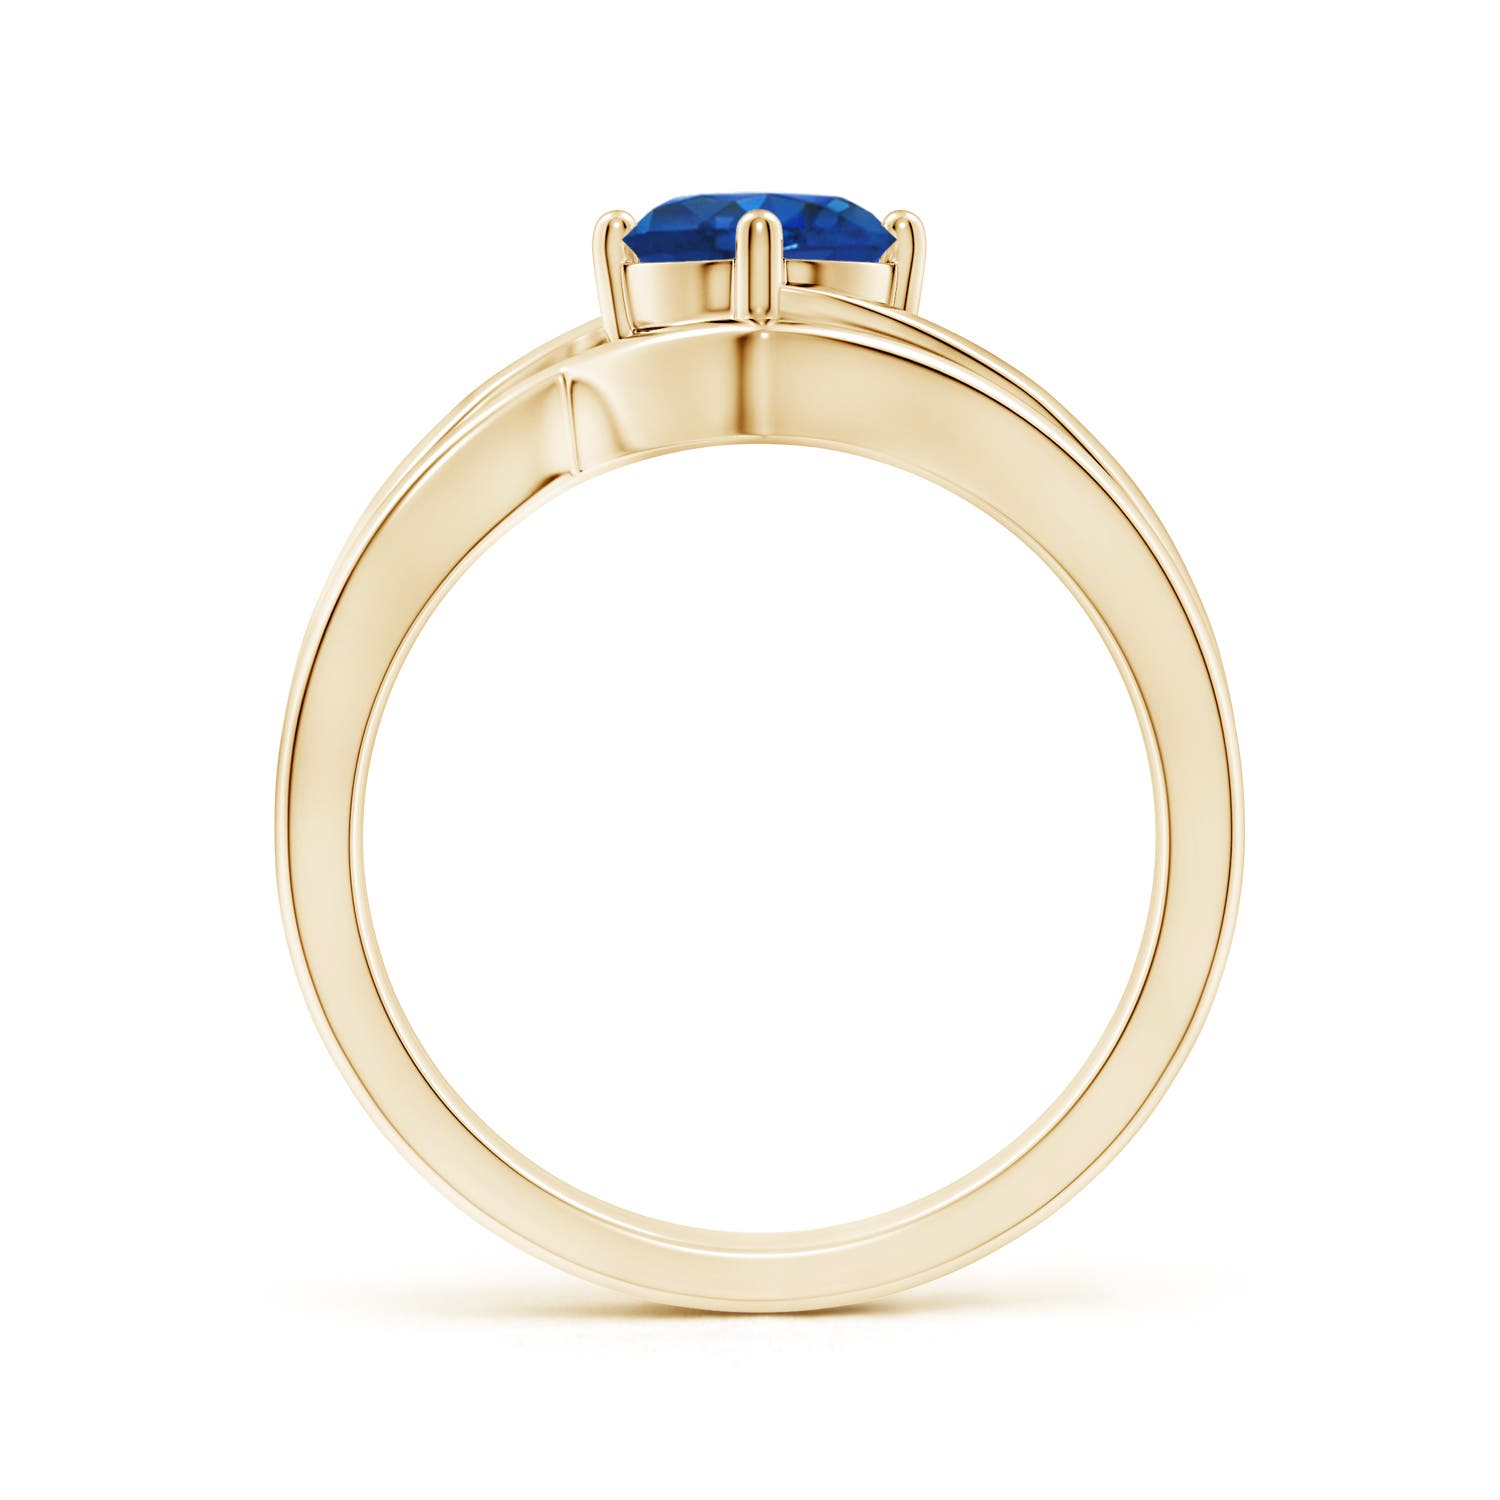 AAA - Blue Sapphire / 1 CT / 14 KT Yellow Gold